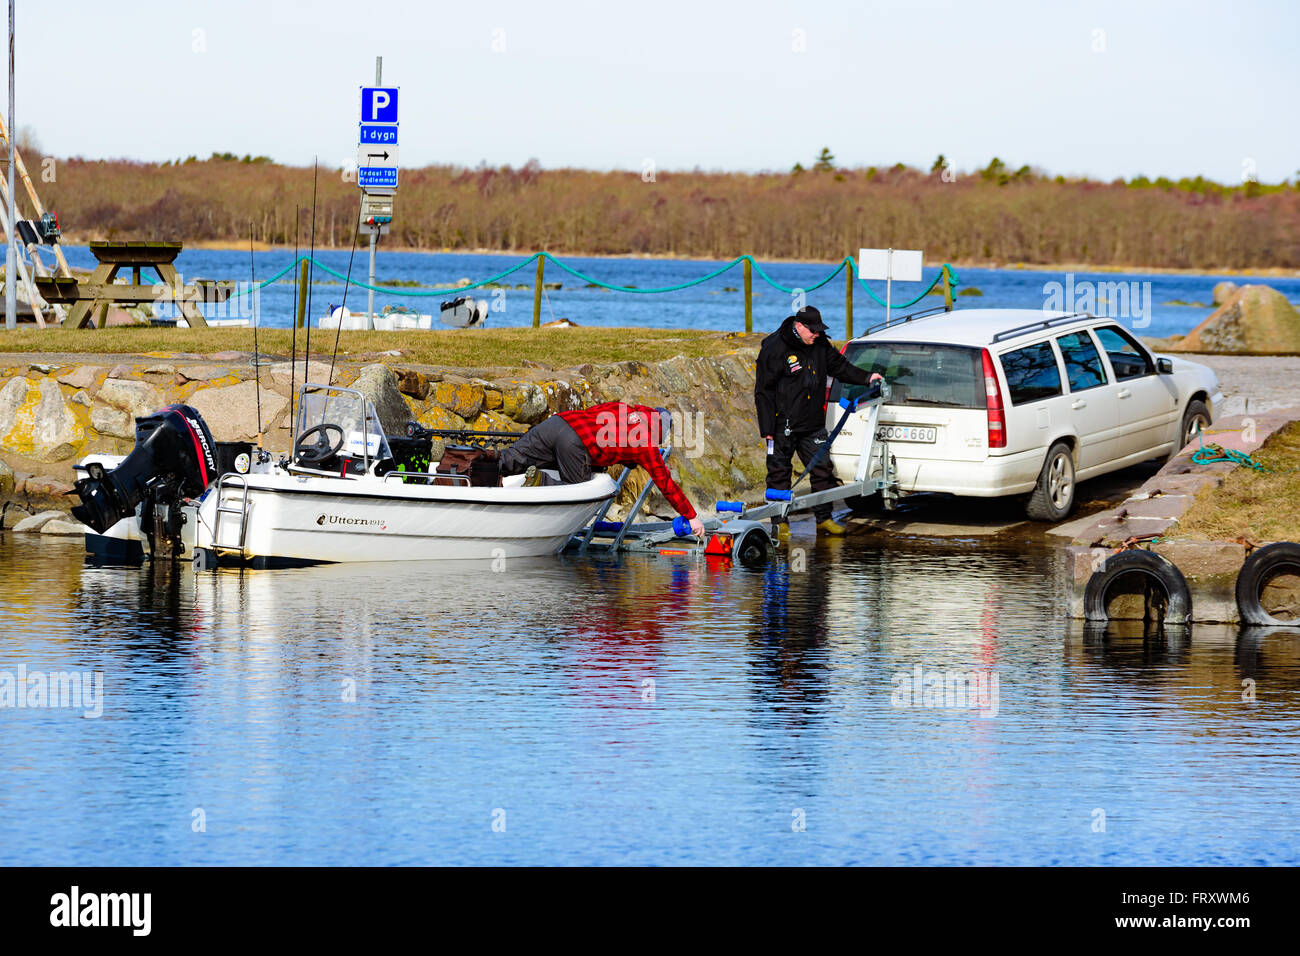 Torhamn, Sweden - March 18, 2016: The launching of a small plastic motor boat at a ramp in the marina. Boat is loaded off a trai Stock Photo